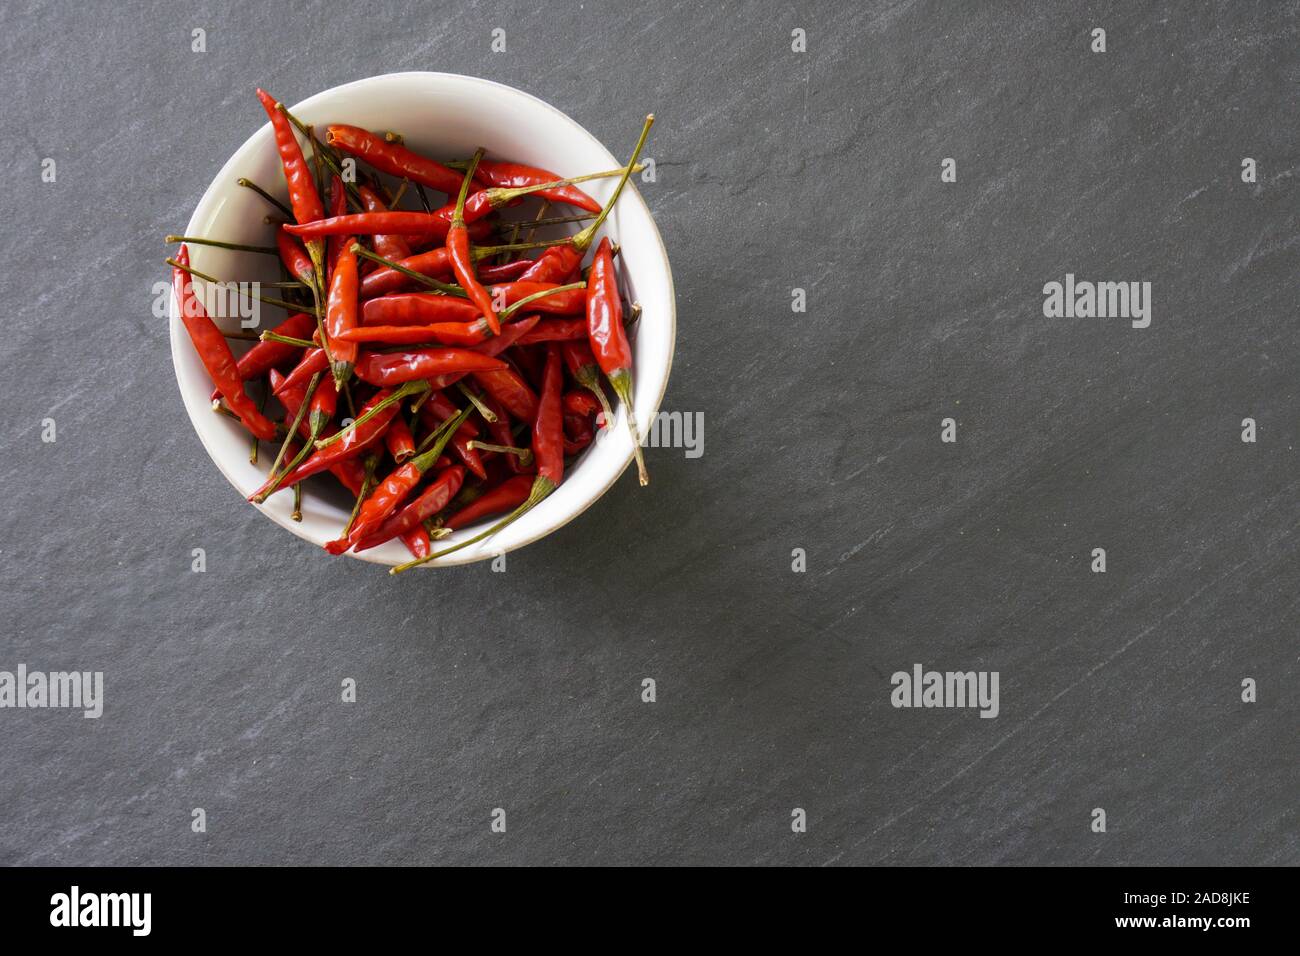 A bowl of bright red chiles on a gray background viewed from above with copy space on the right side and bottom of image Stock Photo